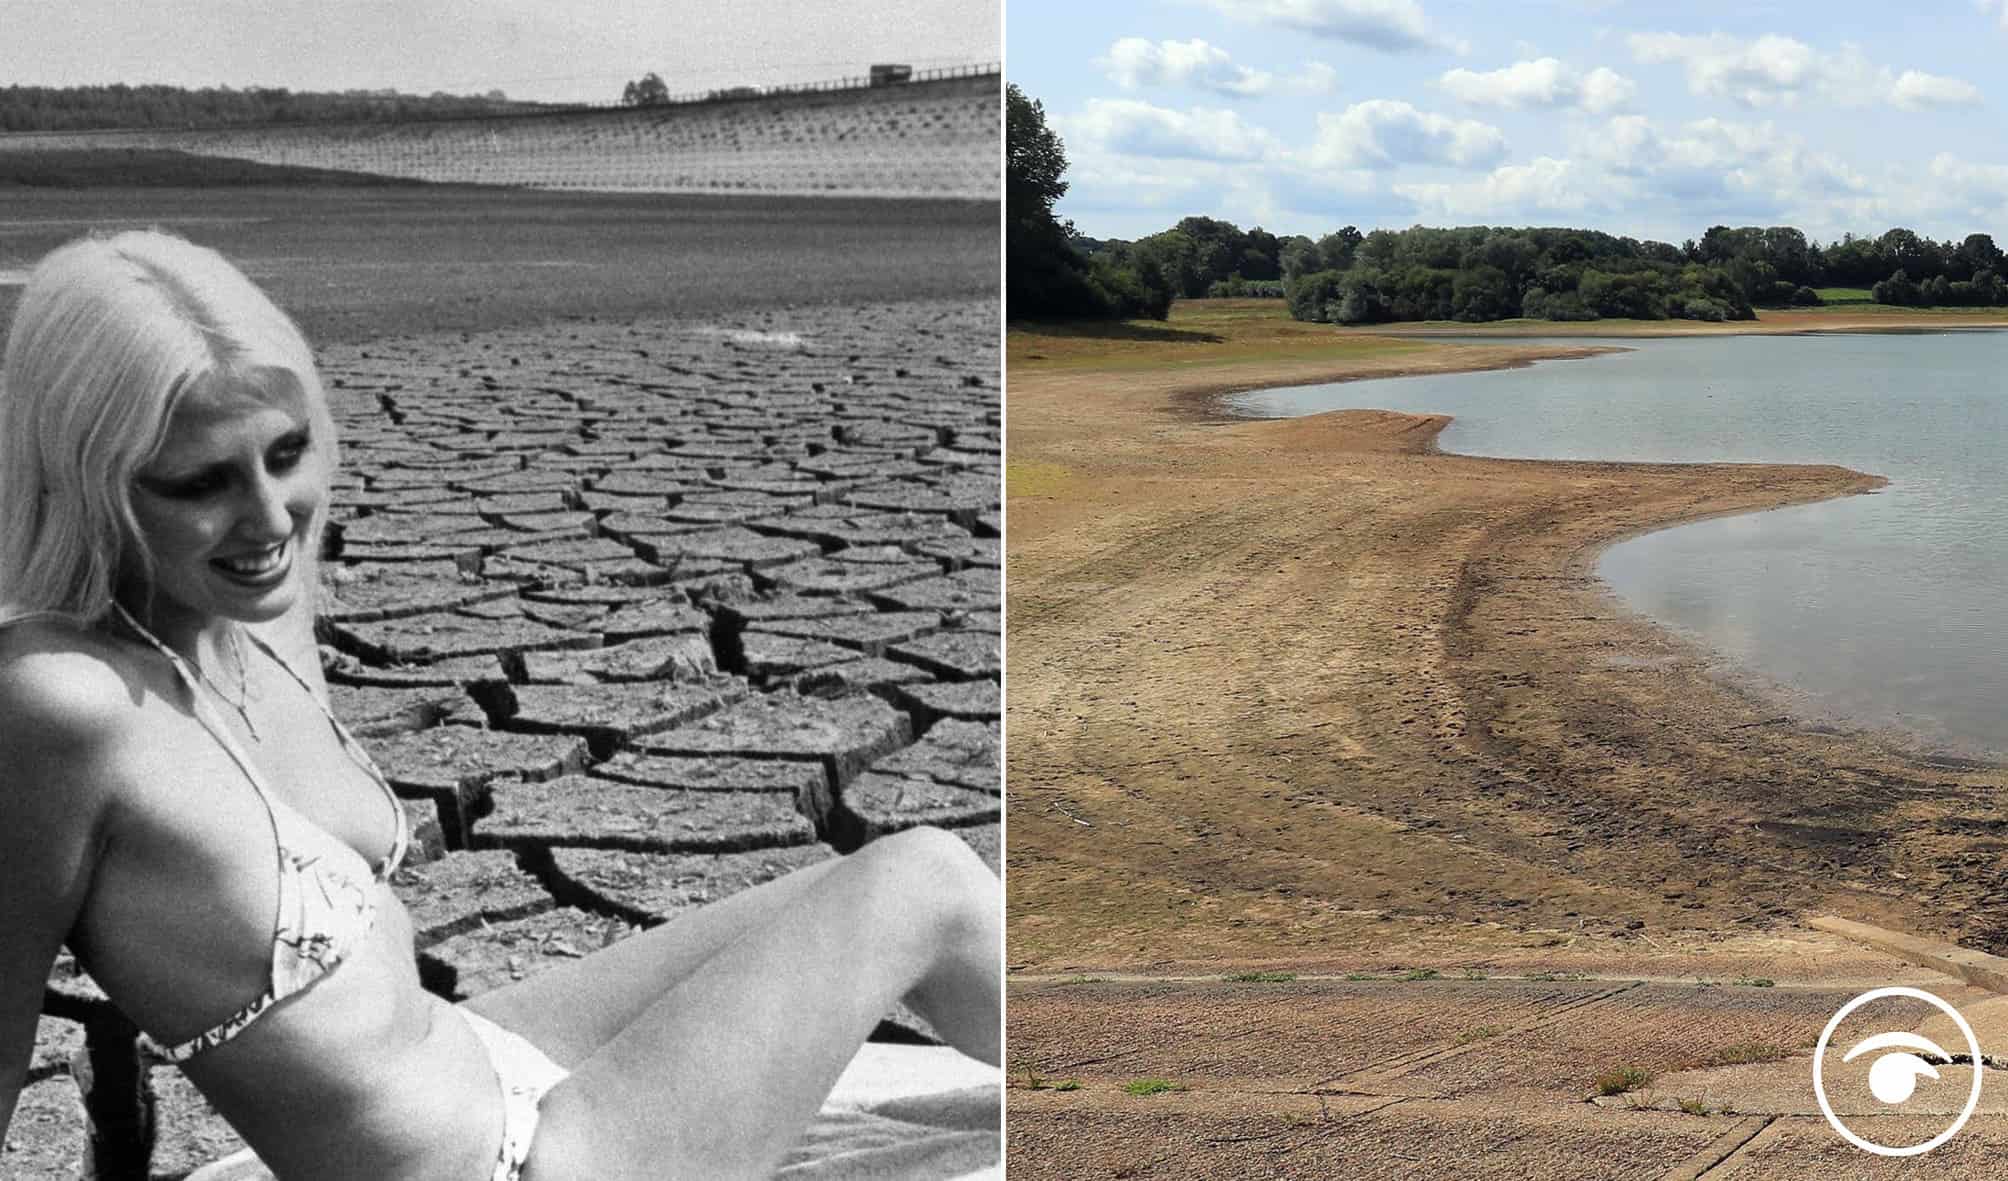 Heatwave: ‘Just like 1976’ claim debunked by graphic comparison